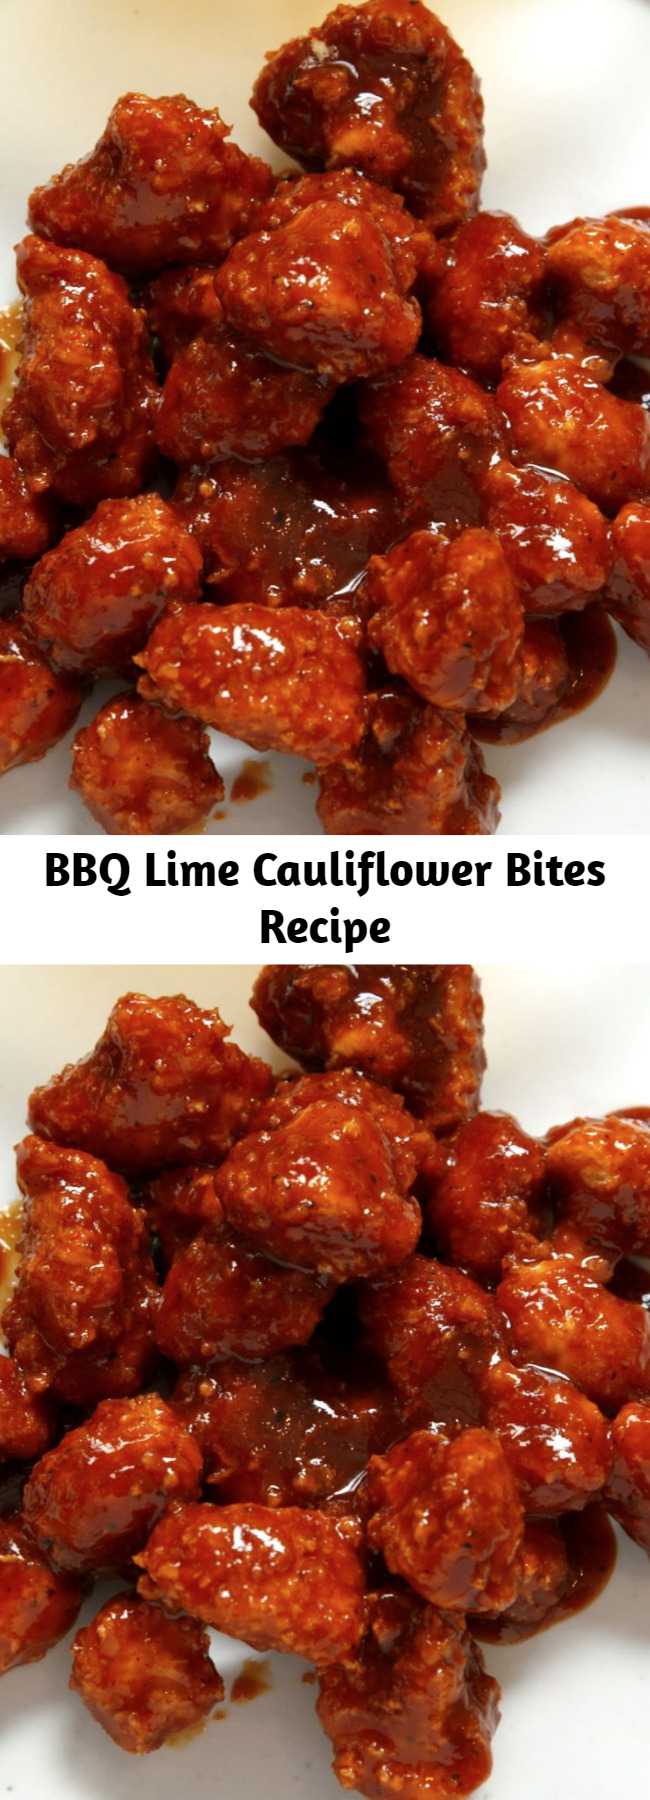 BBQ Lime Cauliflower Bites Recipe - One floret and you'll know why we love this cauliflower so much. The sweet sauce and crunchy cauliflower will feel like you're eating popcorn chicken. Honestly, we love the veggie version more. #easy #recipe #cauliflower #lowcarb #healthy #ranch #ranchdip #barbecue #keto